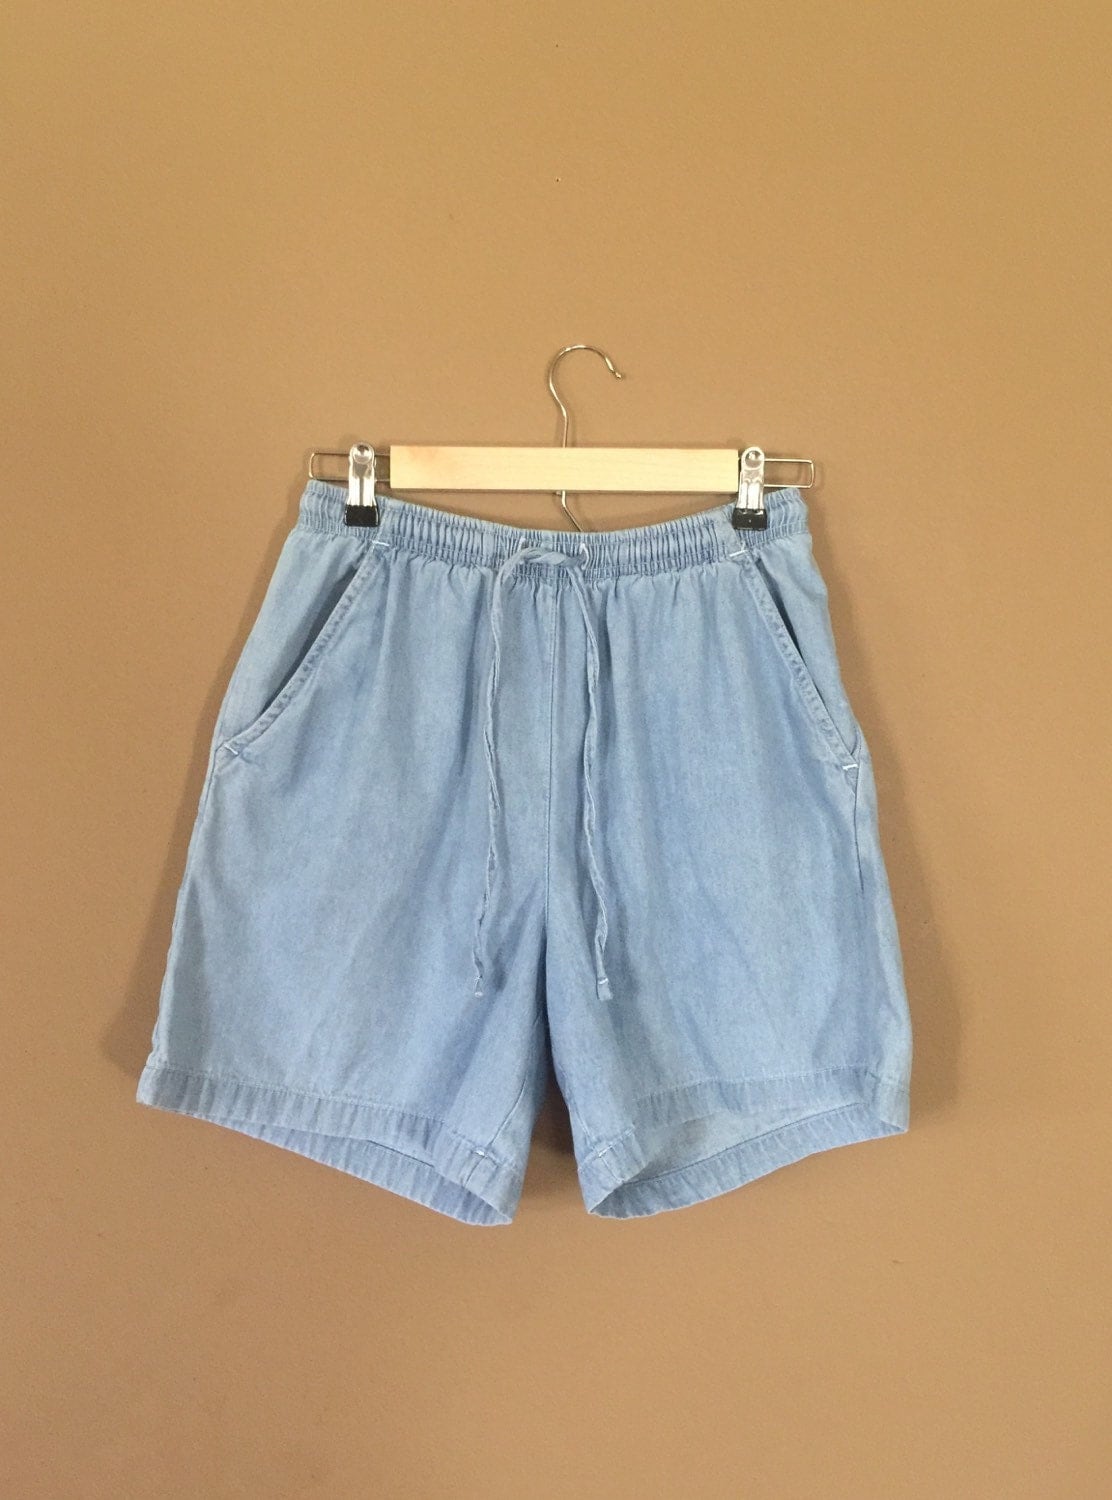 90s High Waisted Shorts / 90s Cotton Shorts / 90s hip hop